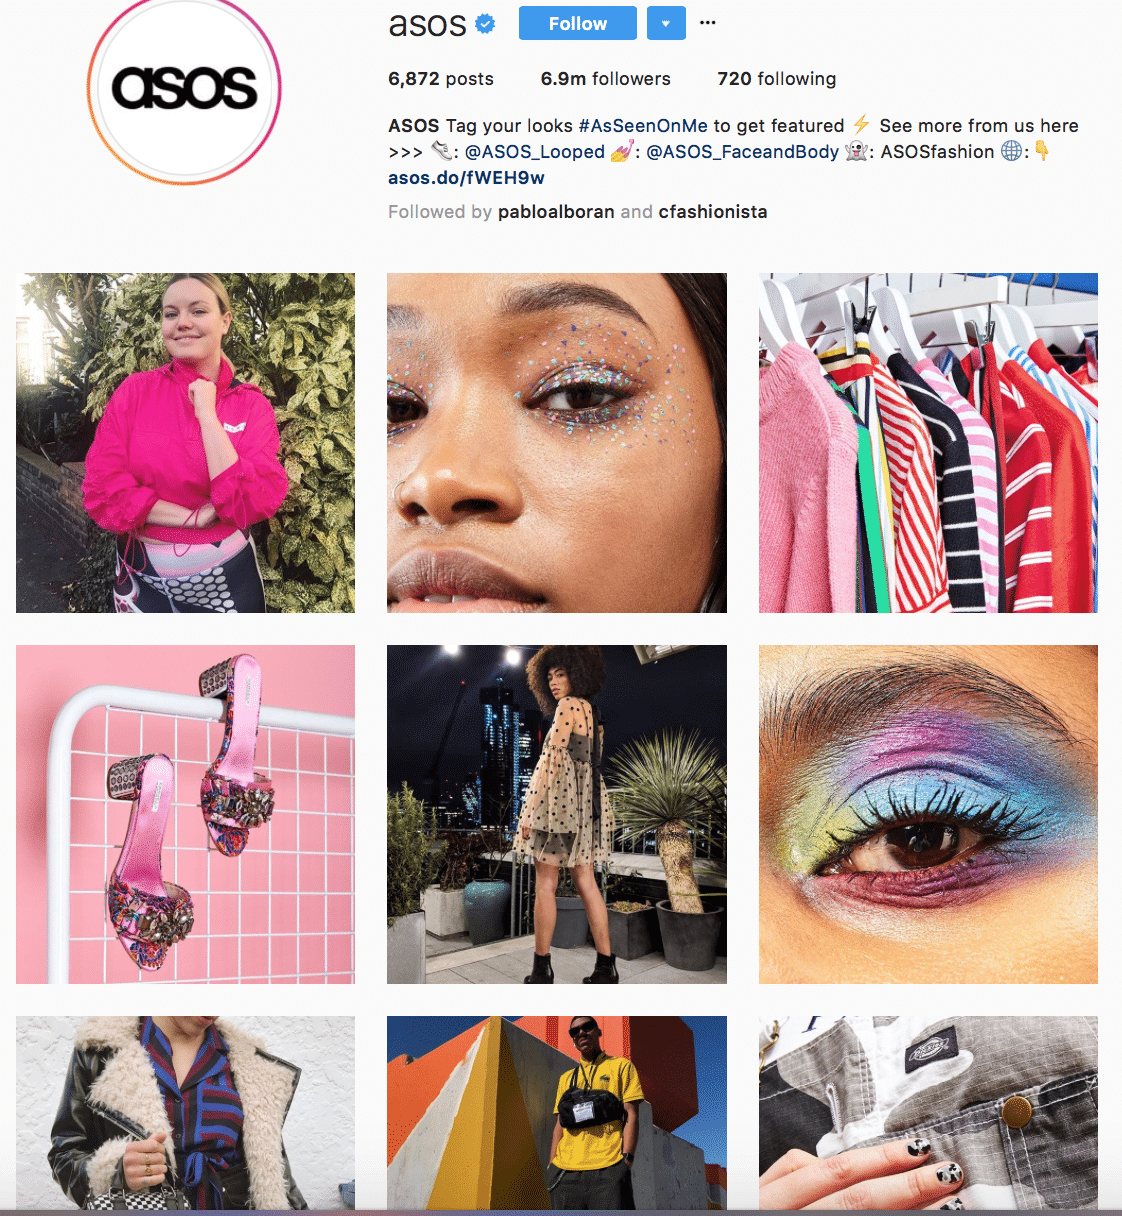 A screenshot of the ASOS Instagram page